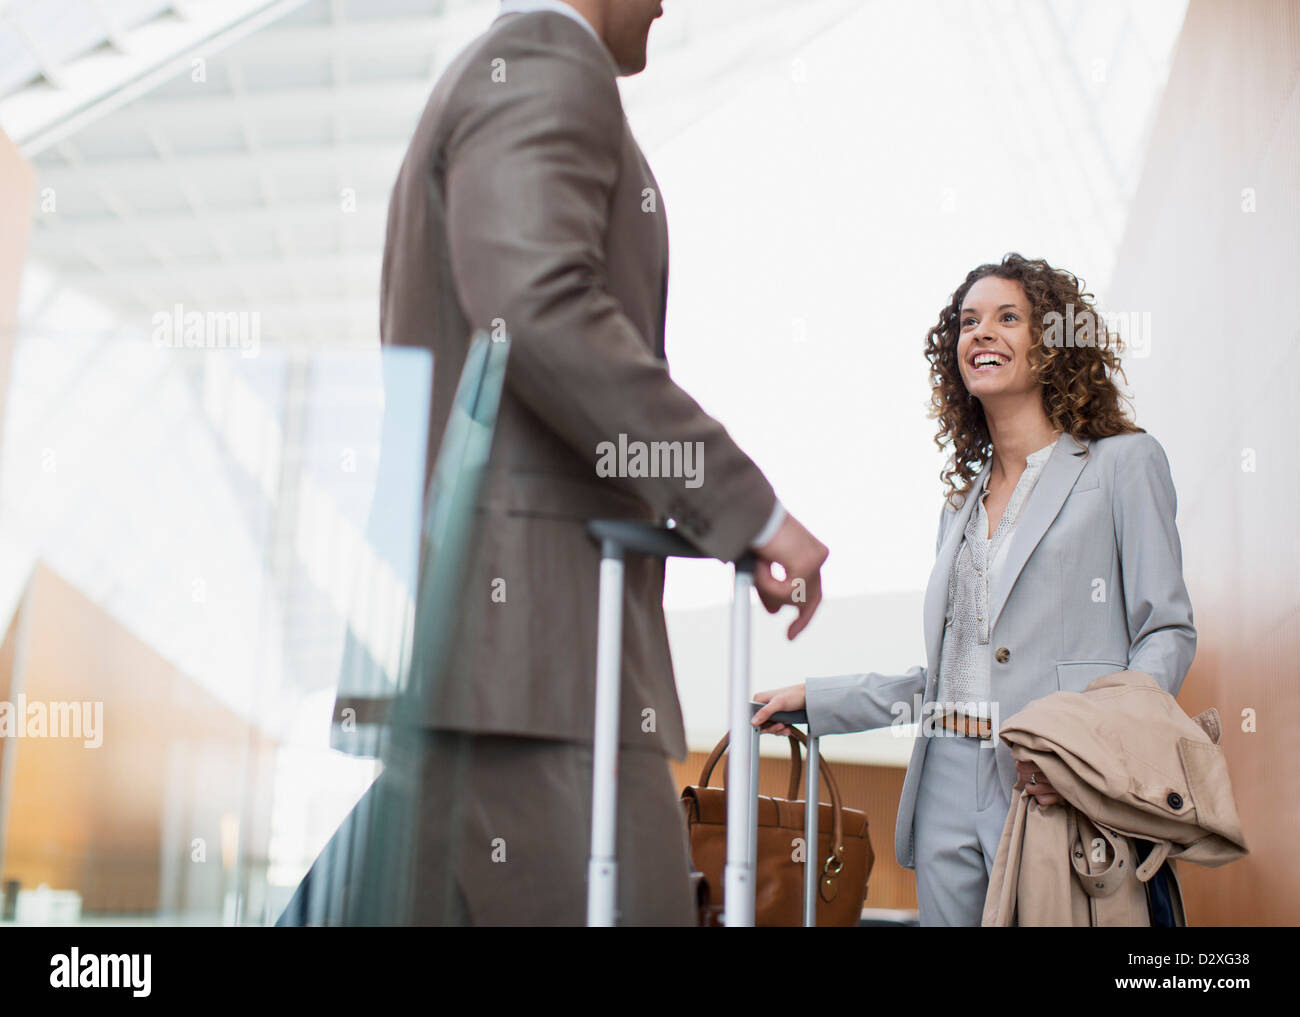 Smiling businesswoman talking to businessman in airport Stock Photo